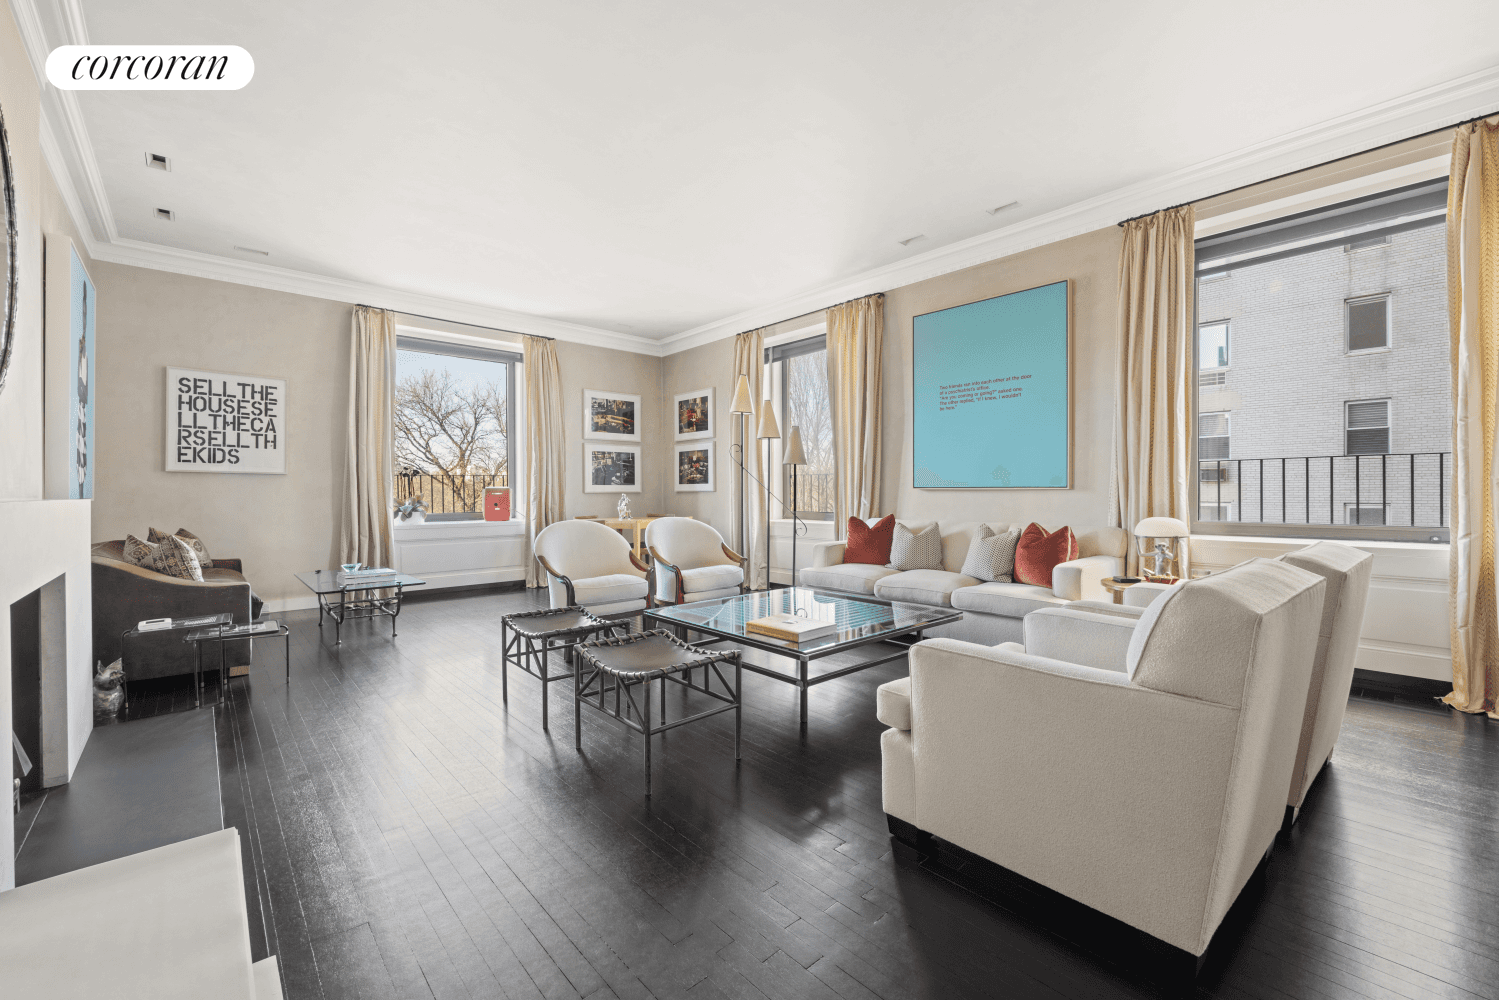 This exquisite A line residence, designed by the esteemed Peter Marino, is a testament to luxury living on Fifth Avenue, at the prestigious corner of Fifth Avenue and 73rd Street.